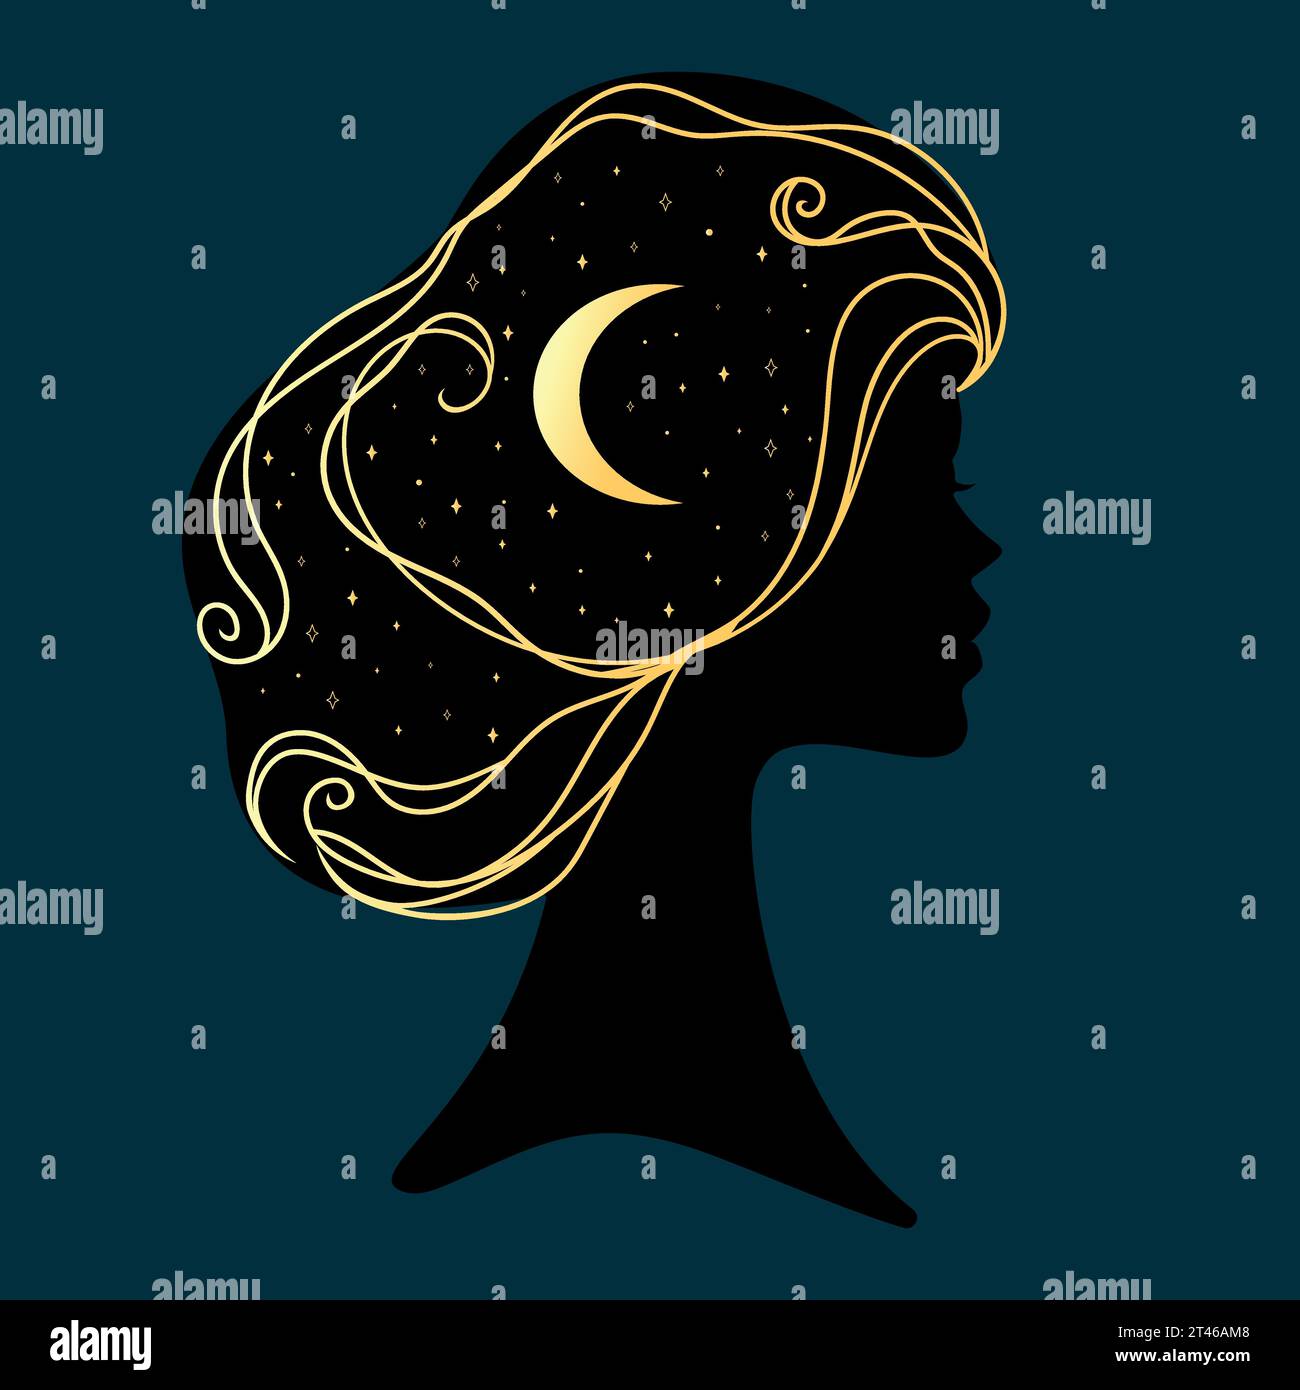 Female profile silhouette with gold stars and crescent. Emblem of a night sky. Vector illustration Stock Vector